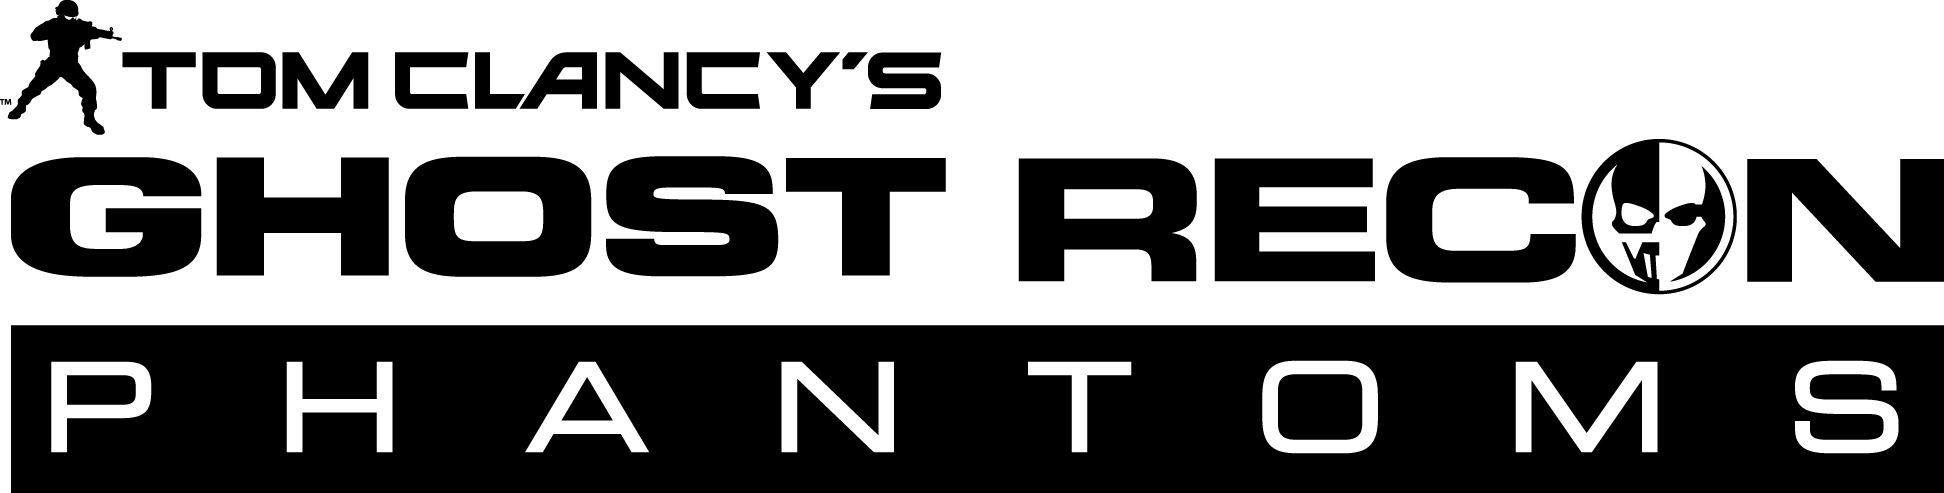 Tom Clancys Ghost Recon Logo PNG Image